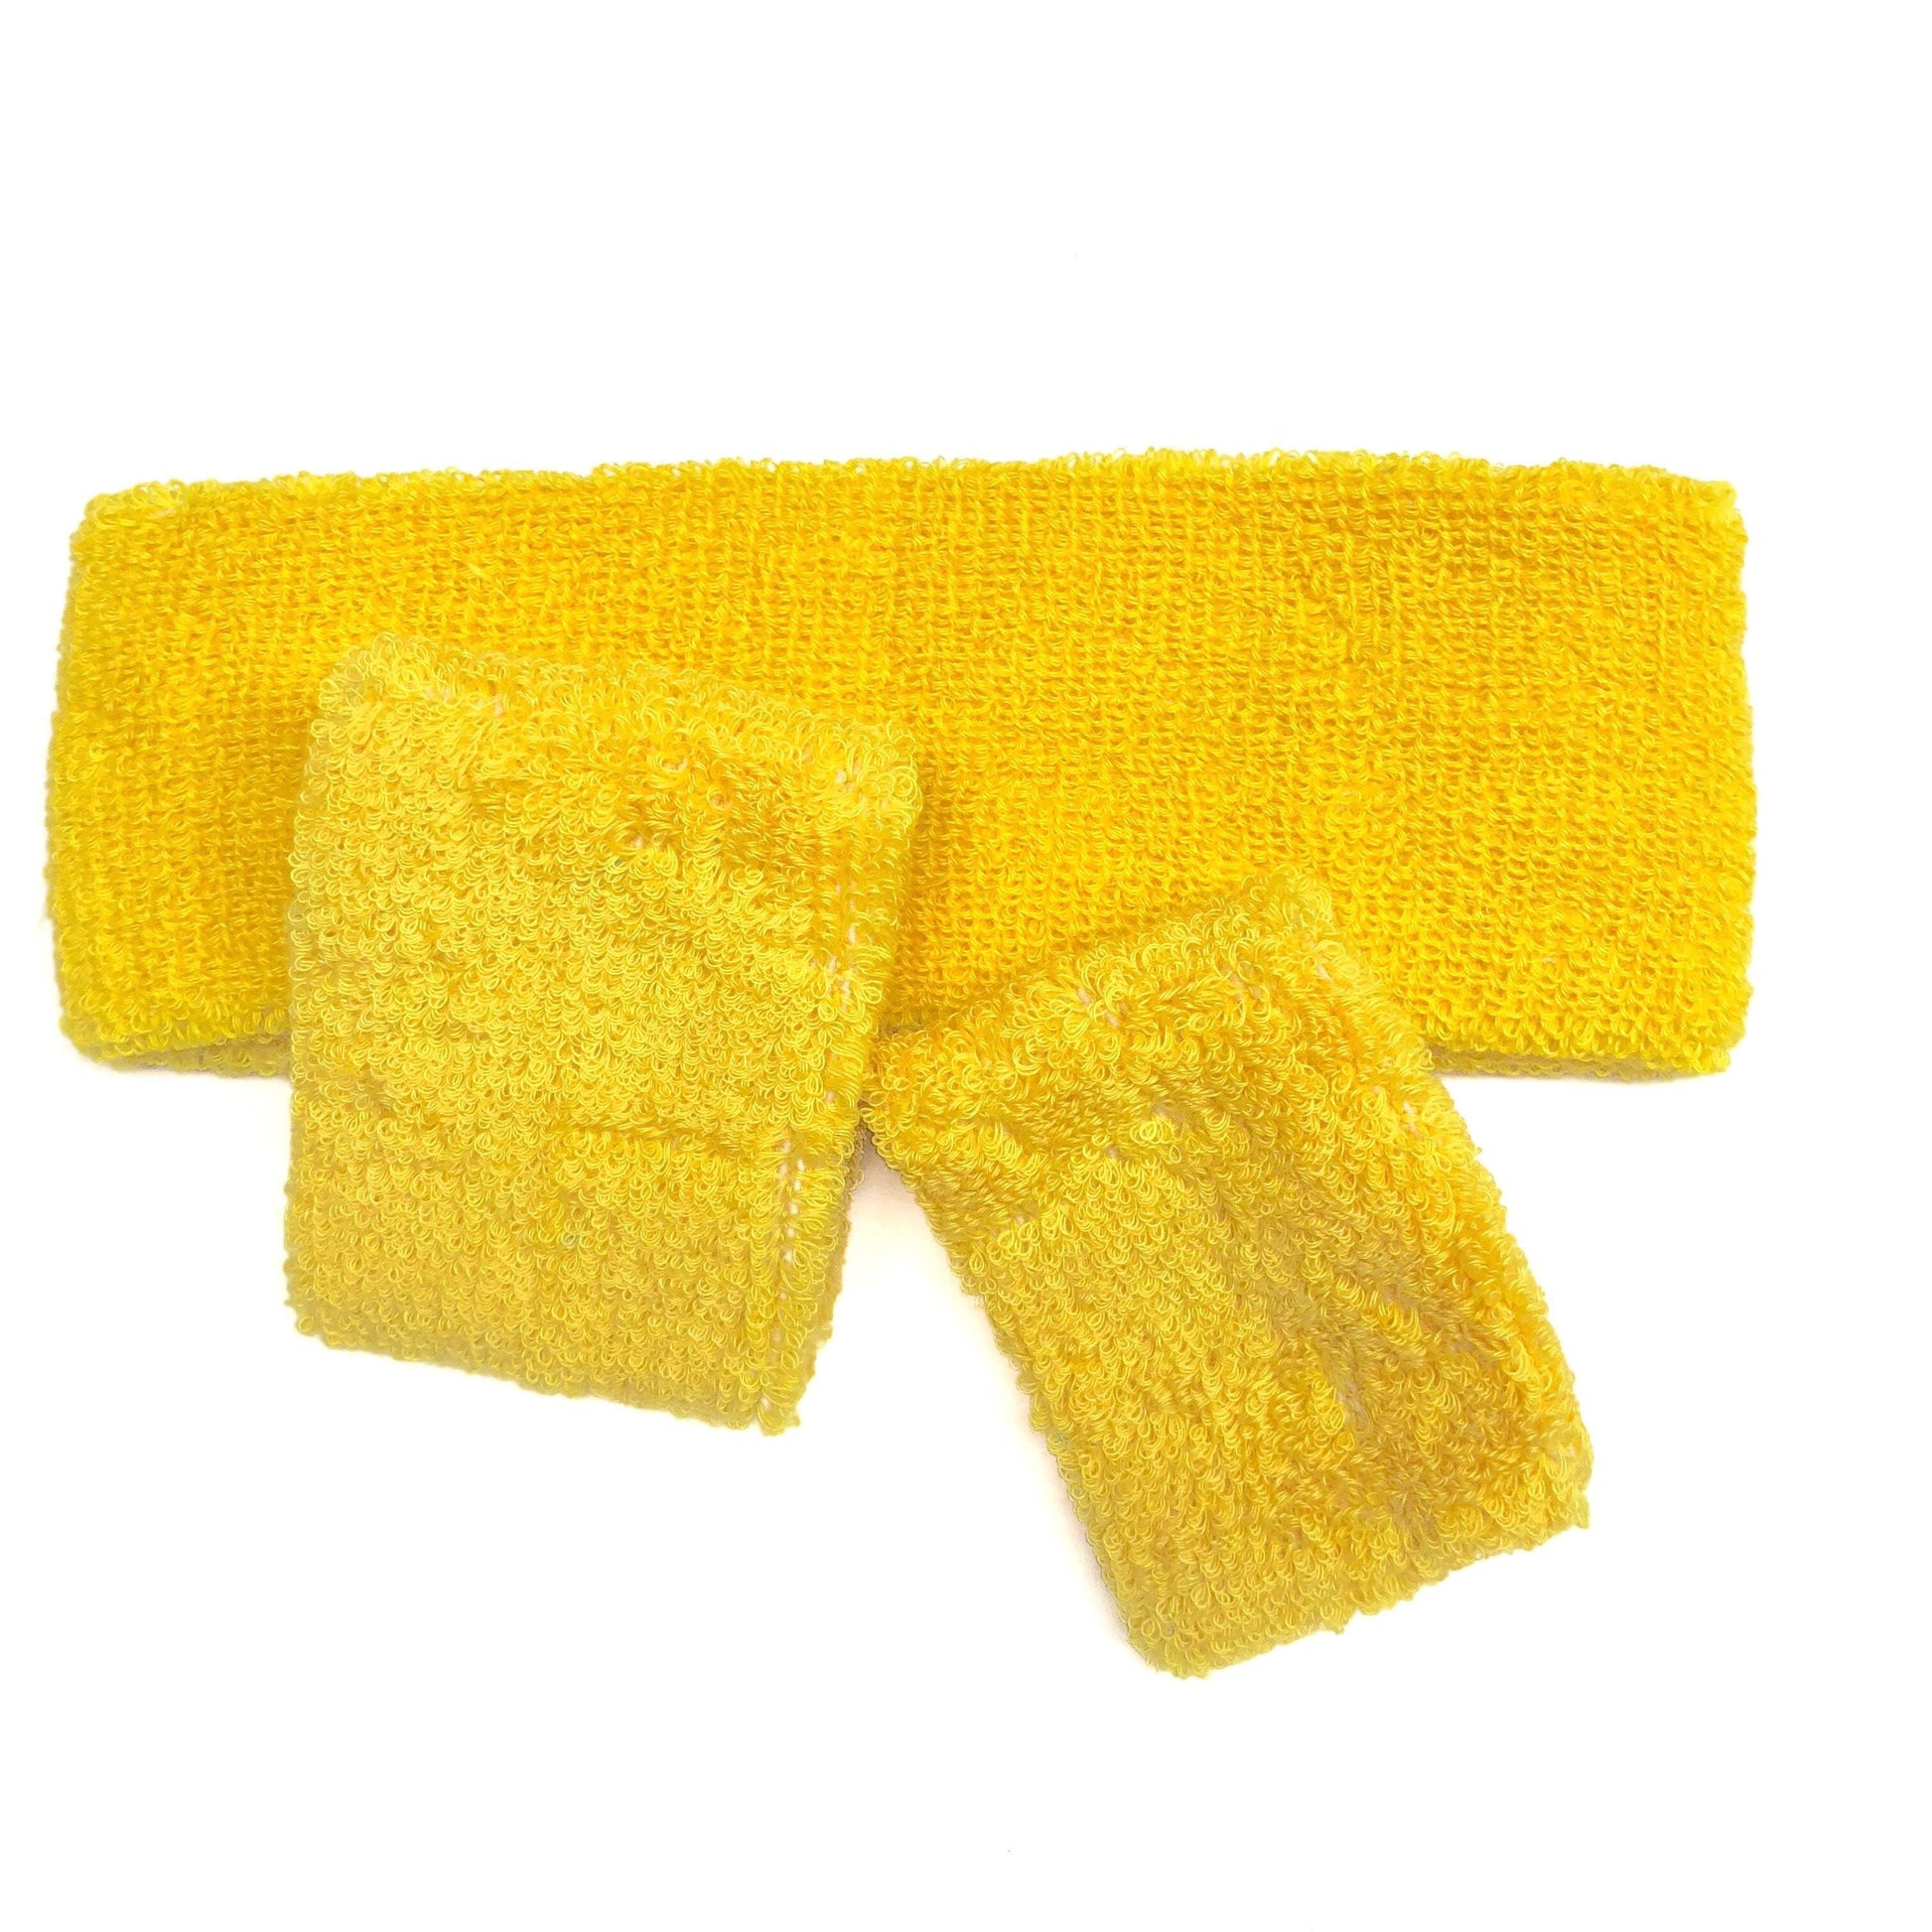 Yellow Sweat Band Set (3pc) - Ponytails and Fairytales